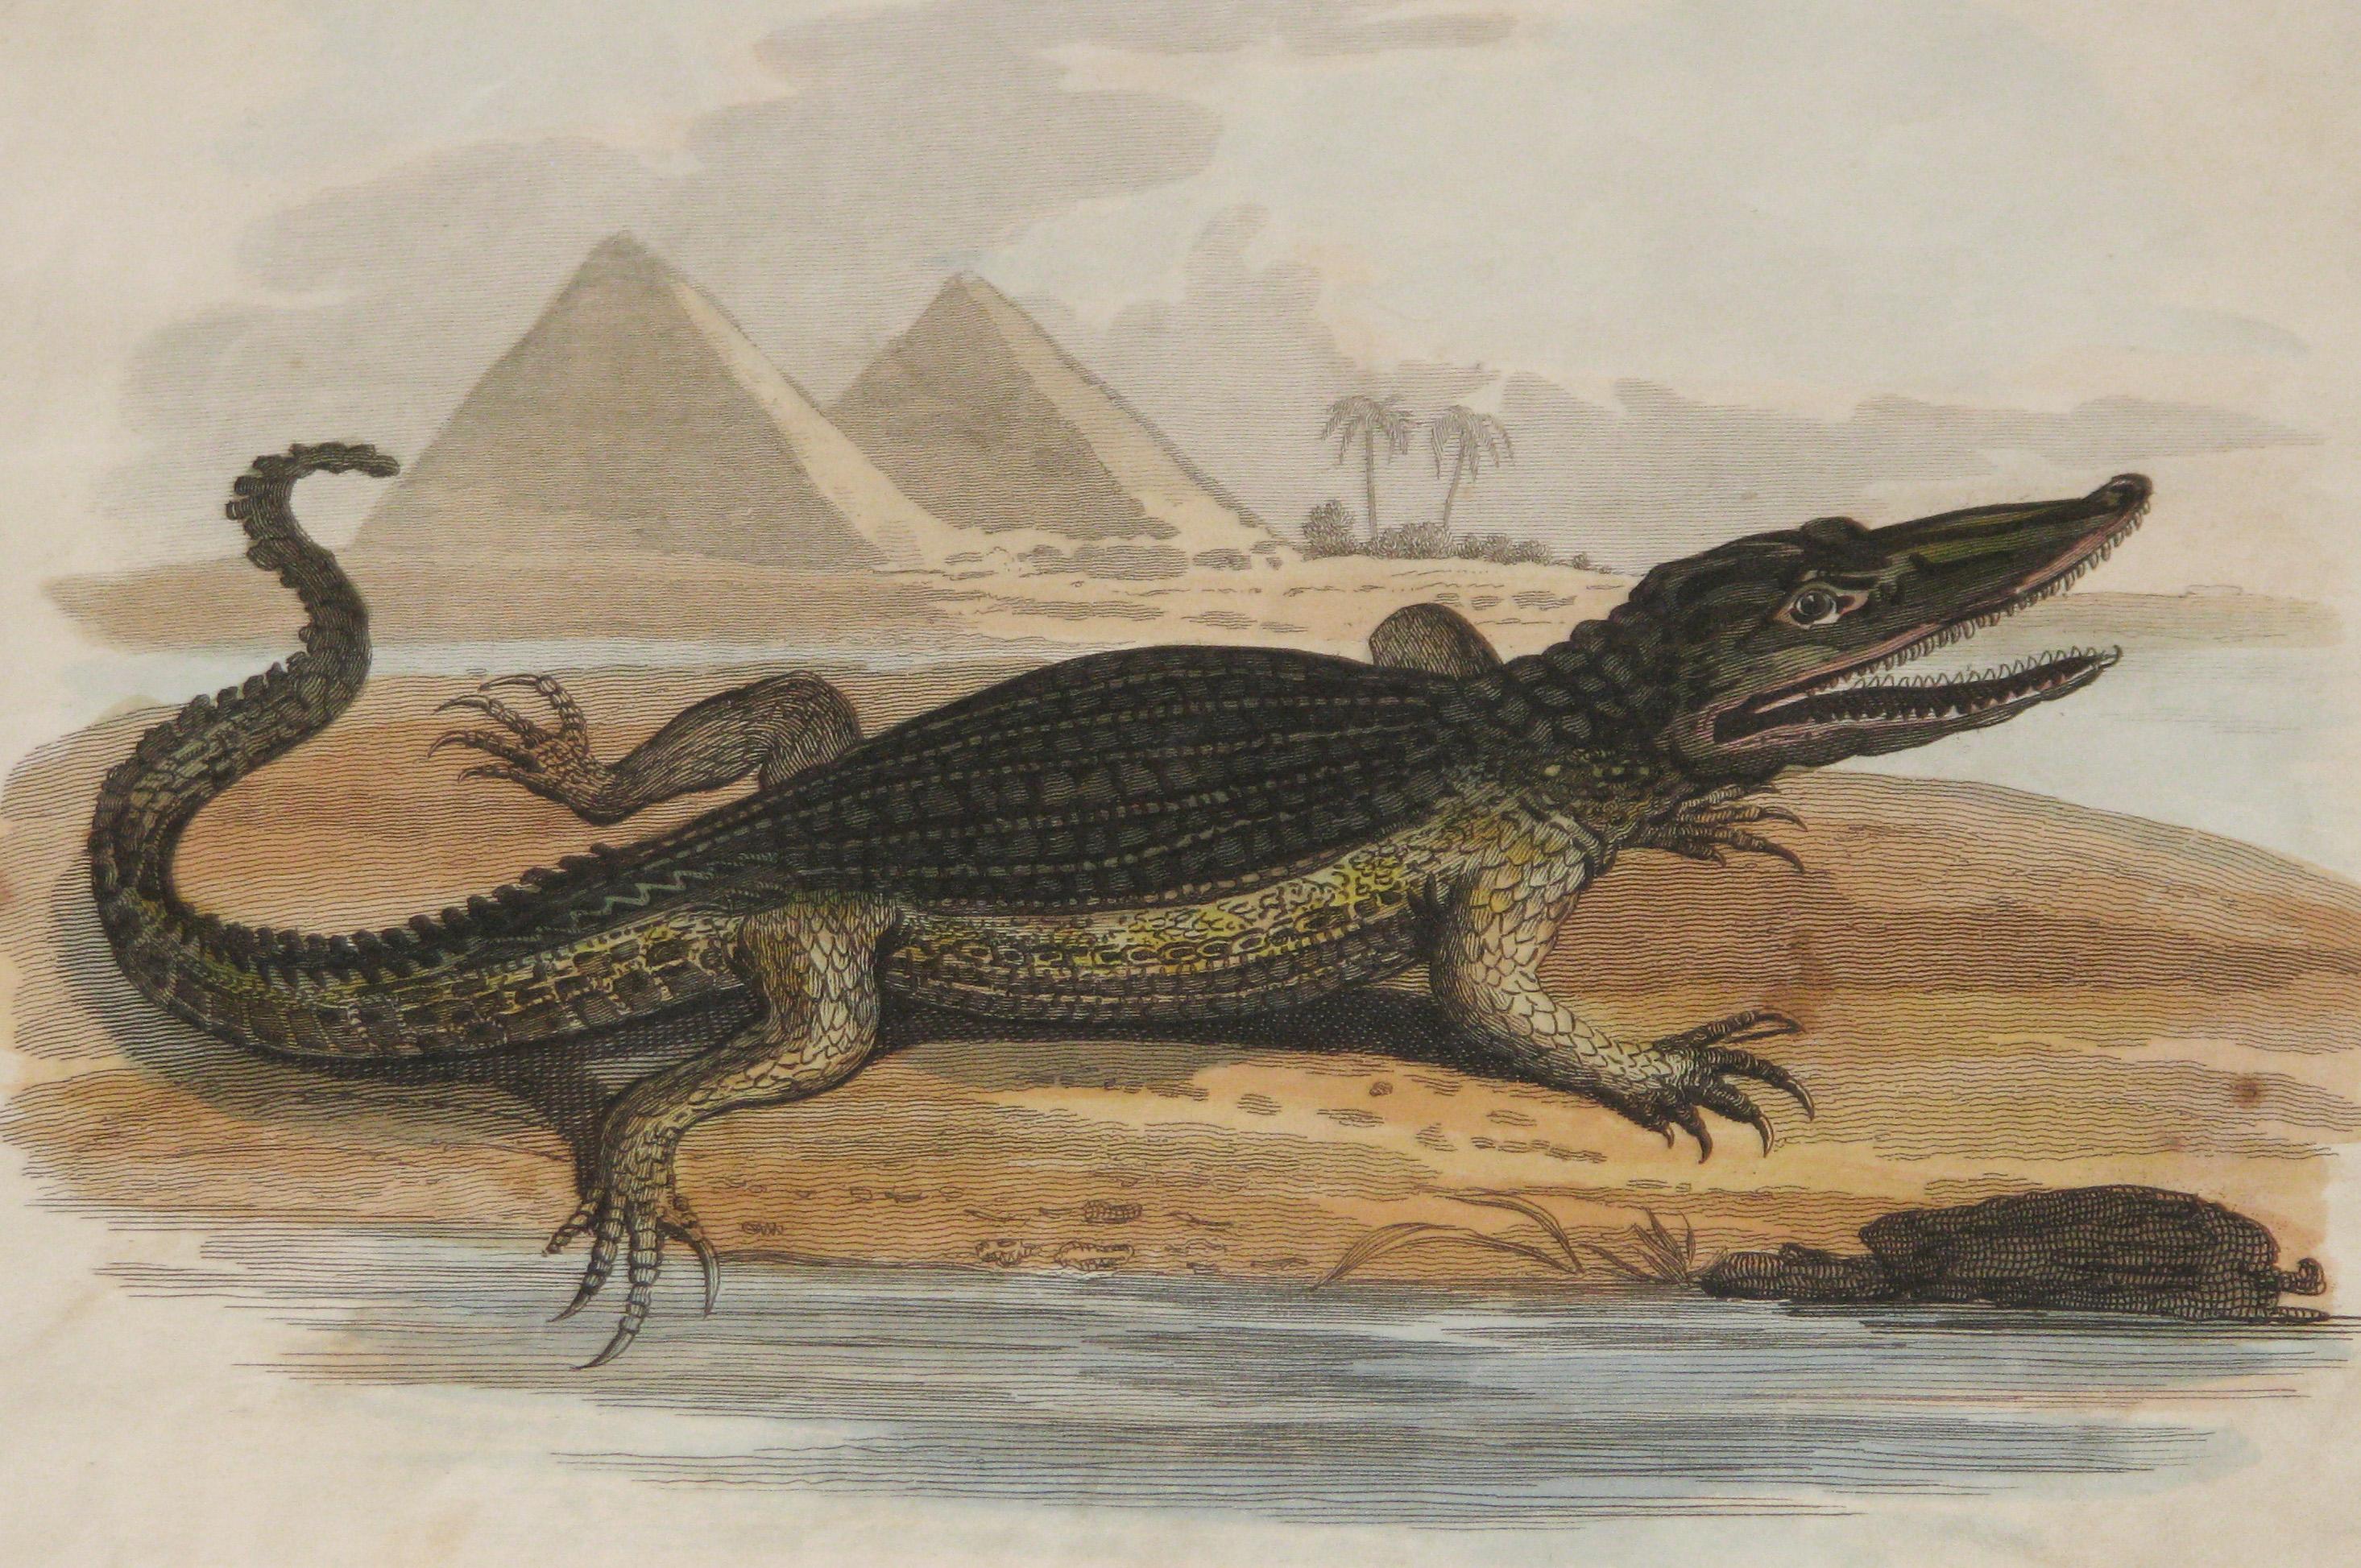 A Regency period copper plate engraving of a Crocodile by William Darton. The Crocodile depicted clambering out of the Nile with the Pyramids in the background. Retaining the original hand color.

Presented in a bespoke hand painted and gilded